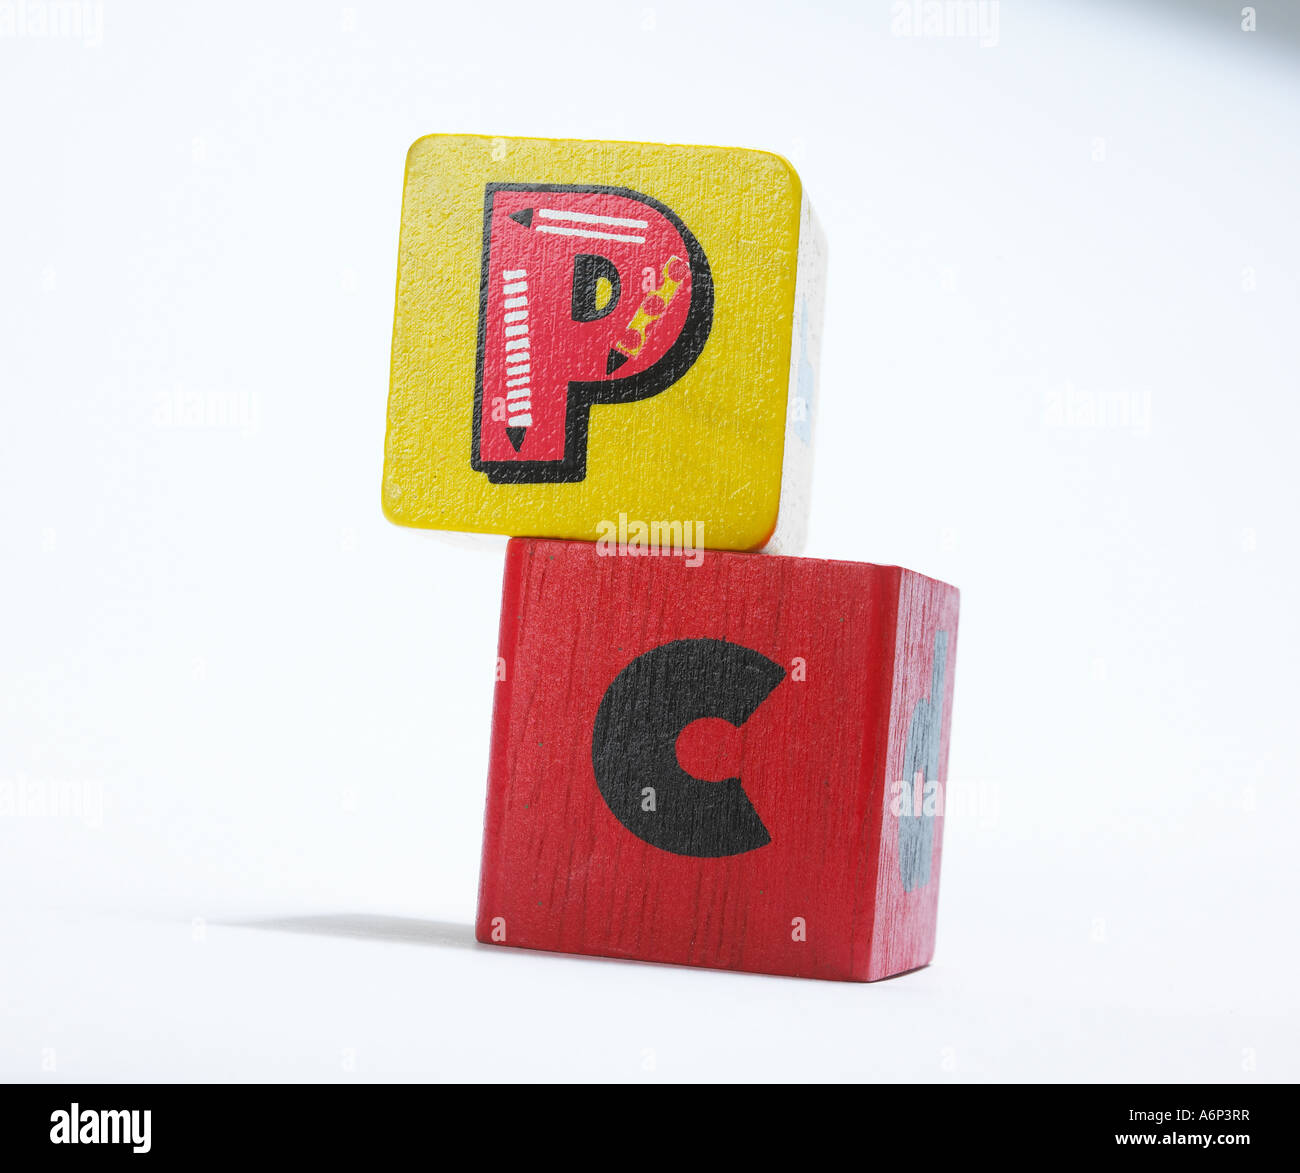 pc - personal computer spelt out in childrens building blocks Stock Photo